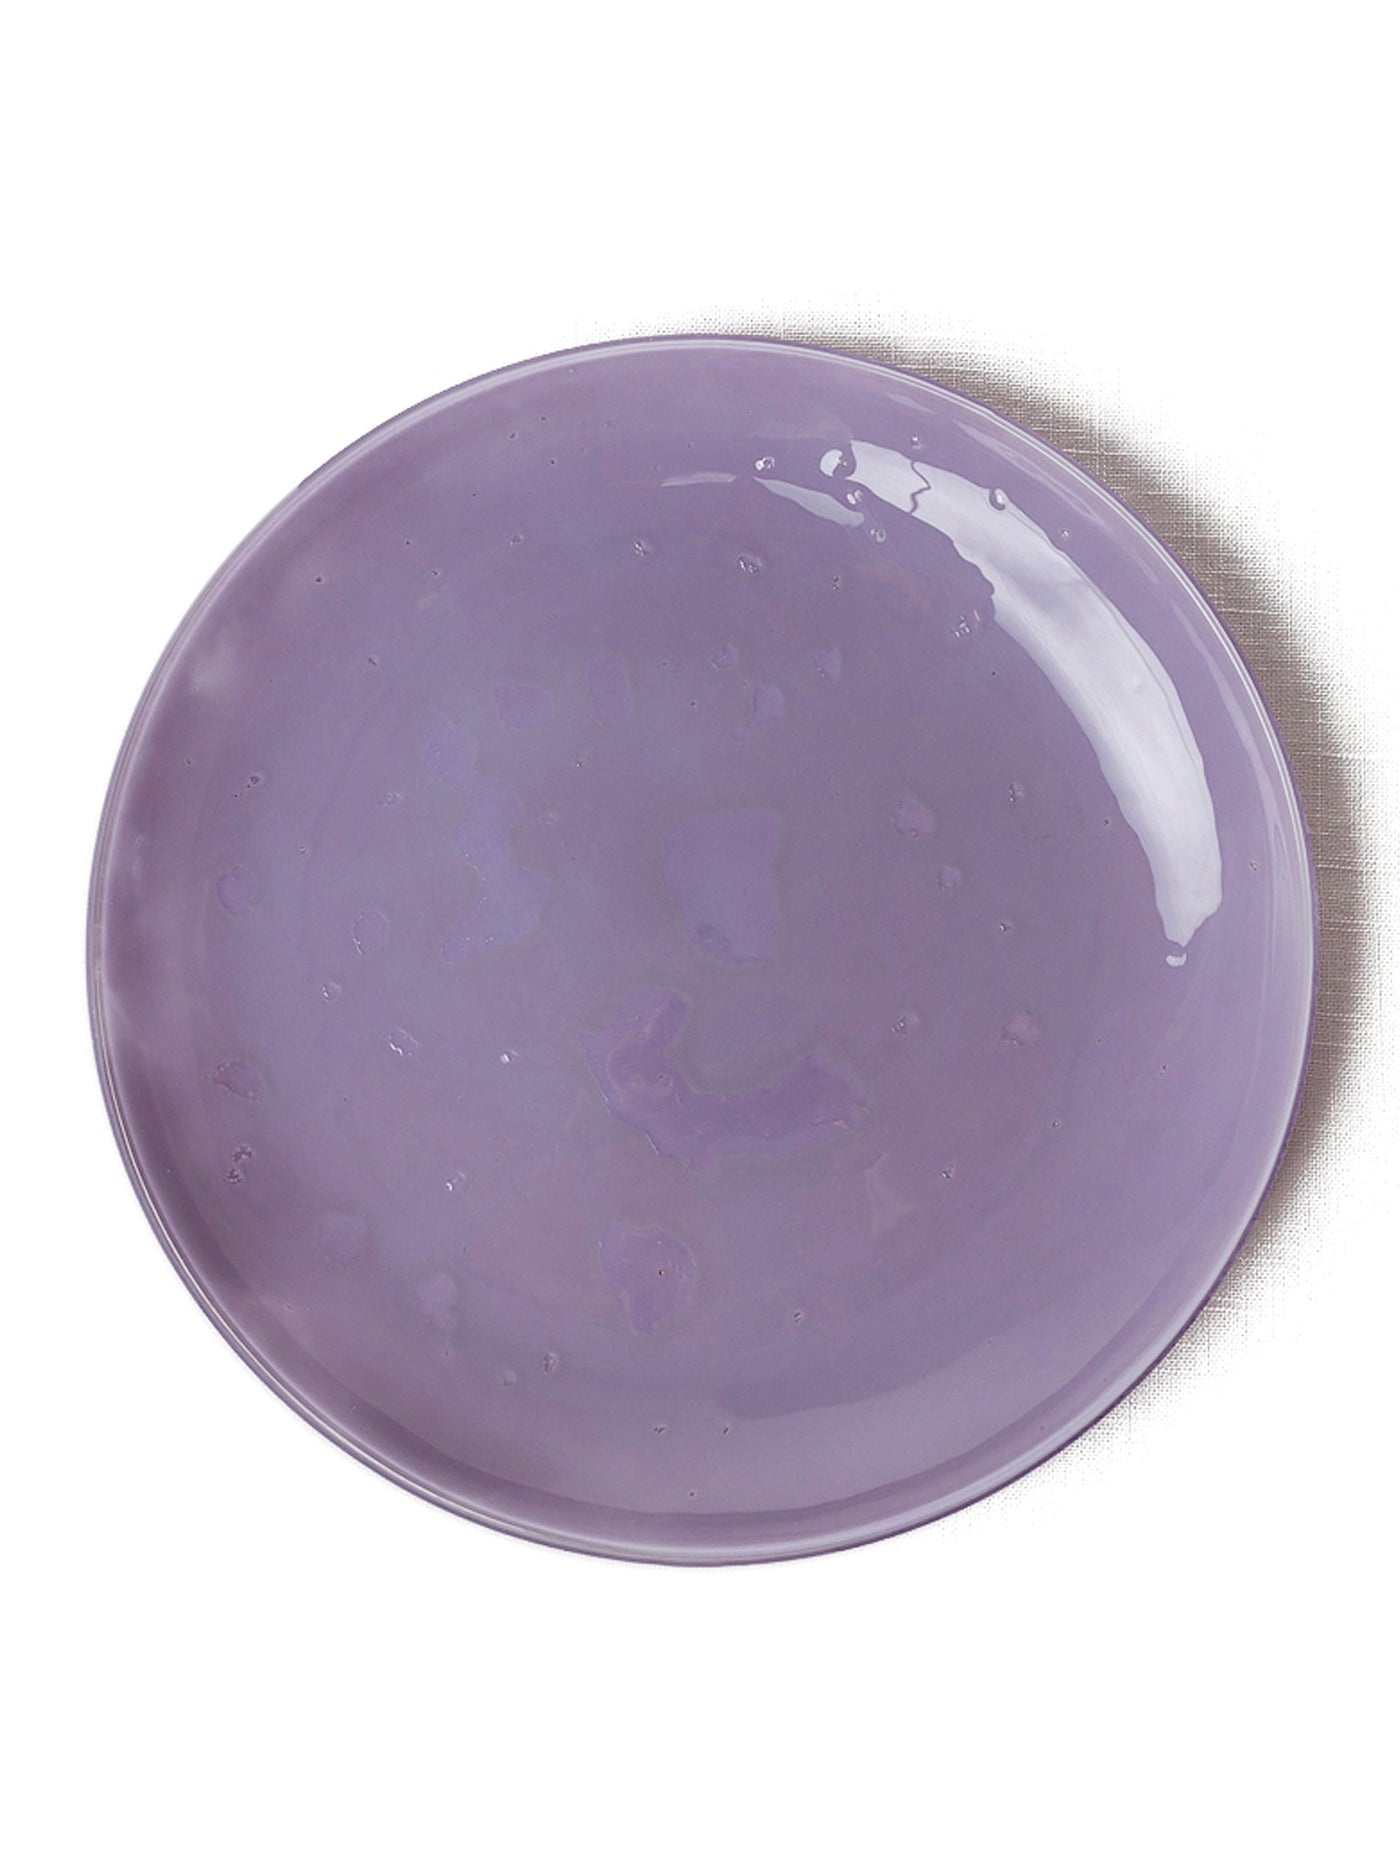 Handmade Glass Dinner Plate in Lavender by Caju Collective